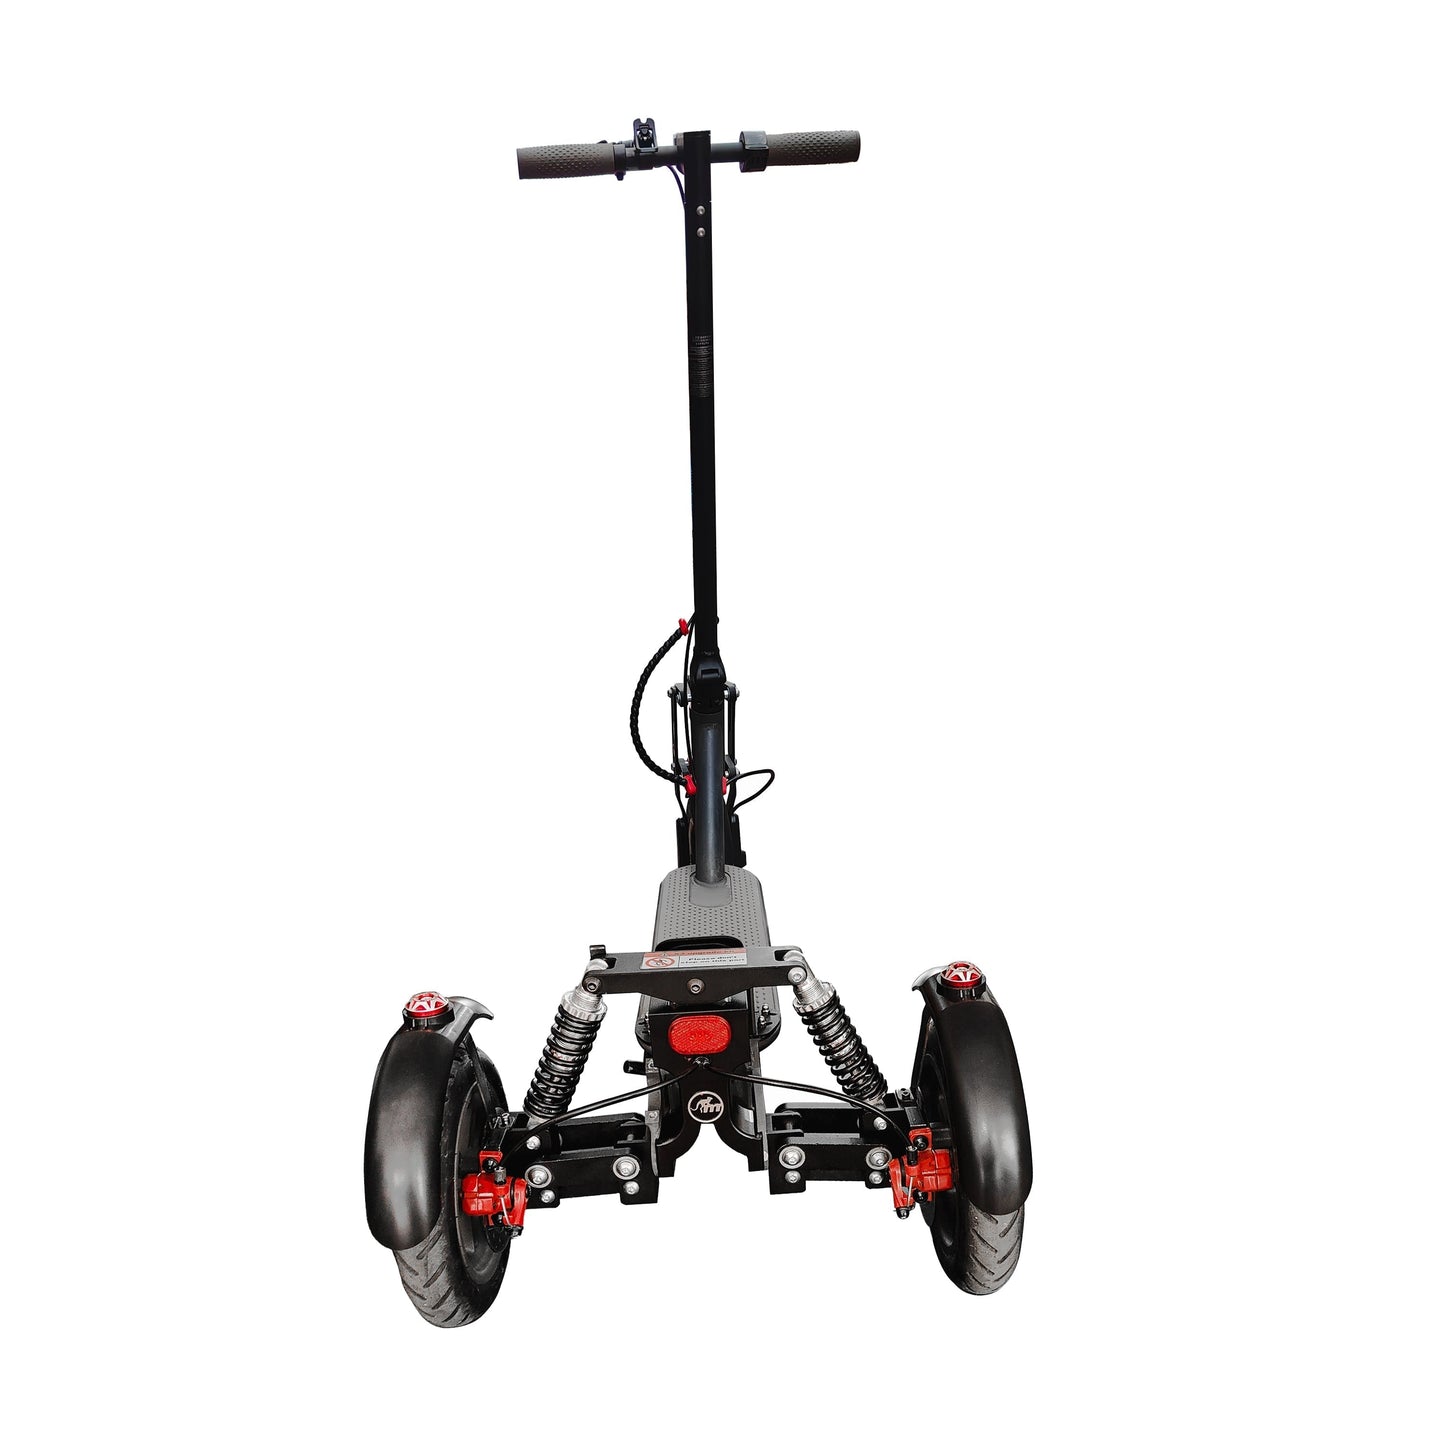 Monorim X3 upgrade kit to be Three wheels special for xiaomi ES Scooter